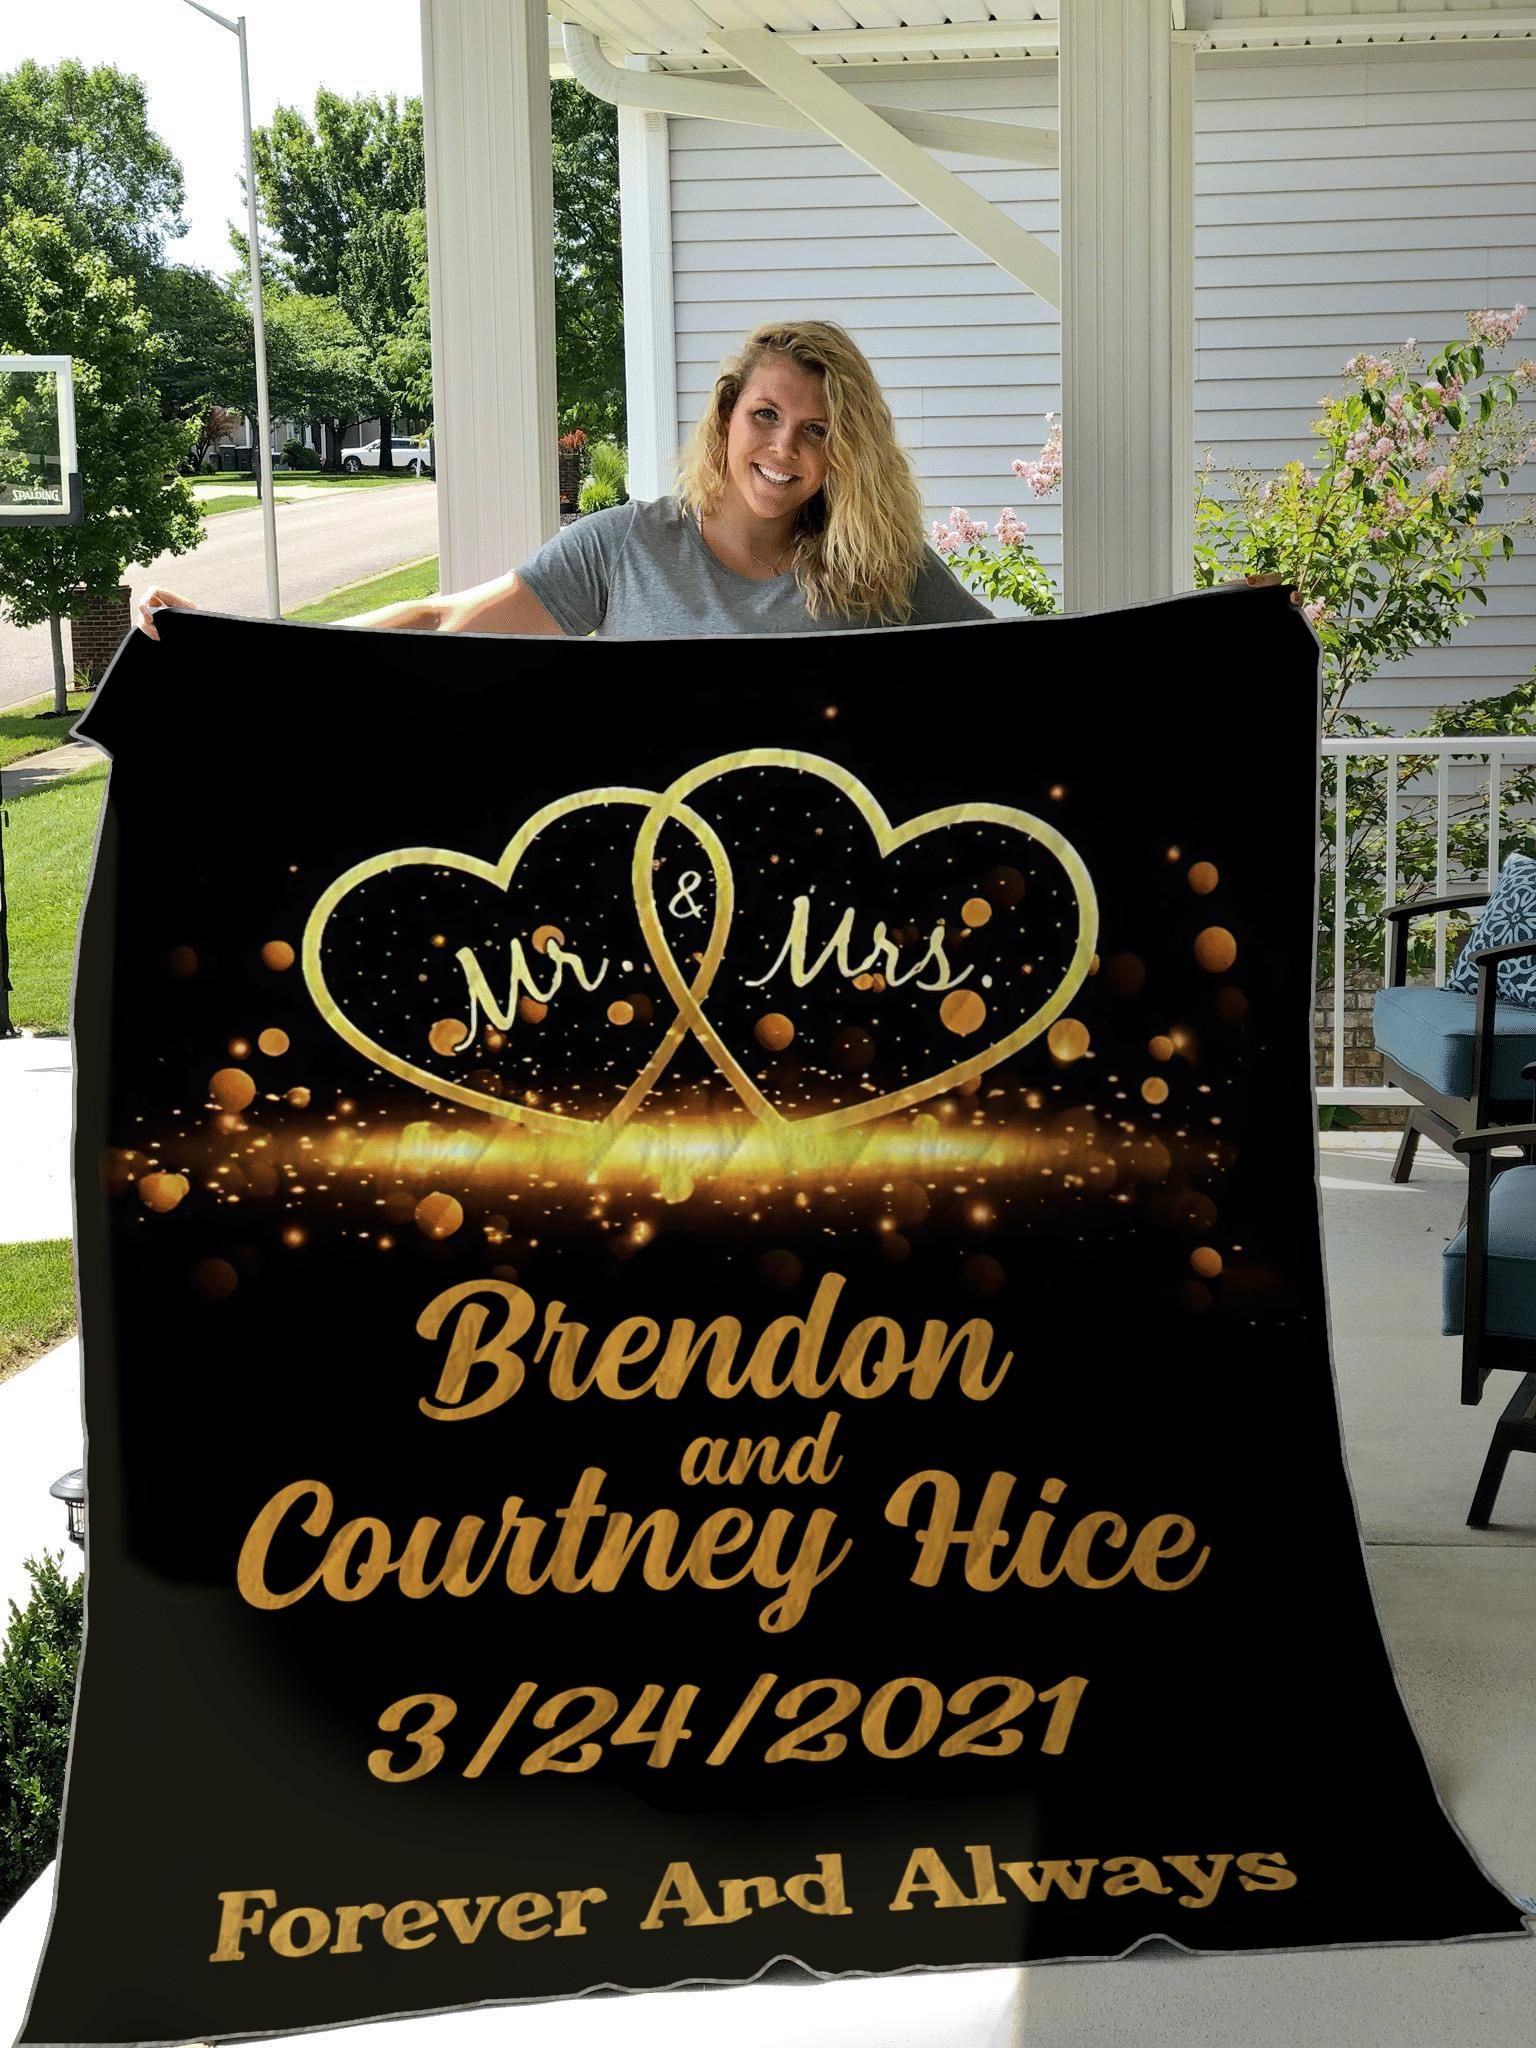 Mr And Mrs Anderson Forever And Always Custom Text Name And Year Brendon And Courtney Hice; 3242021 Quilt